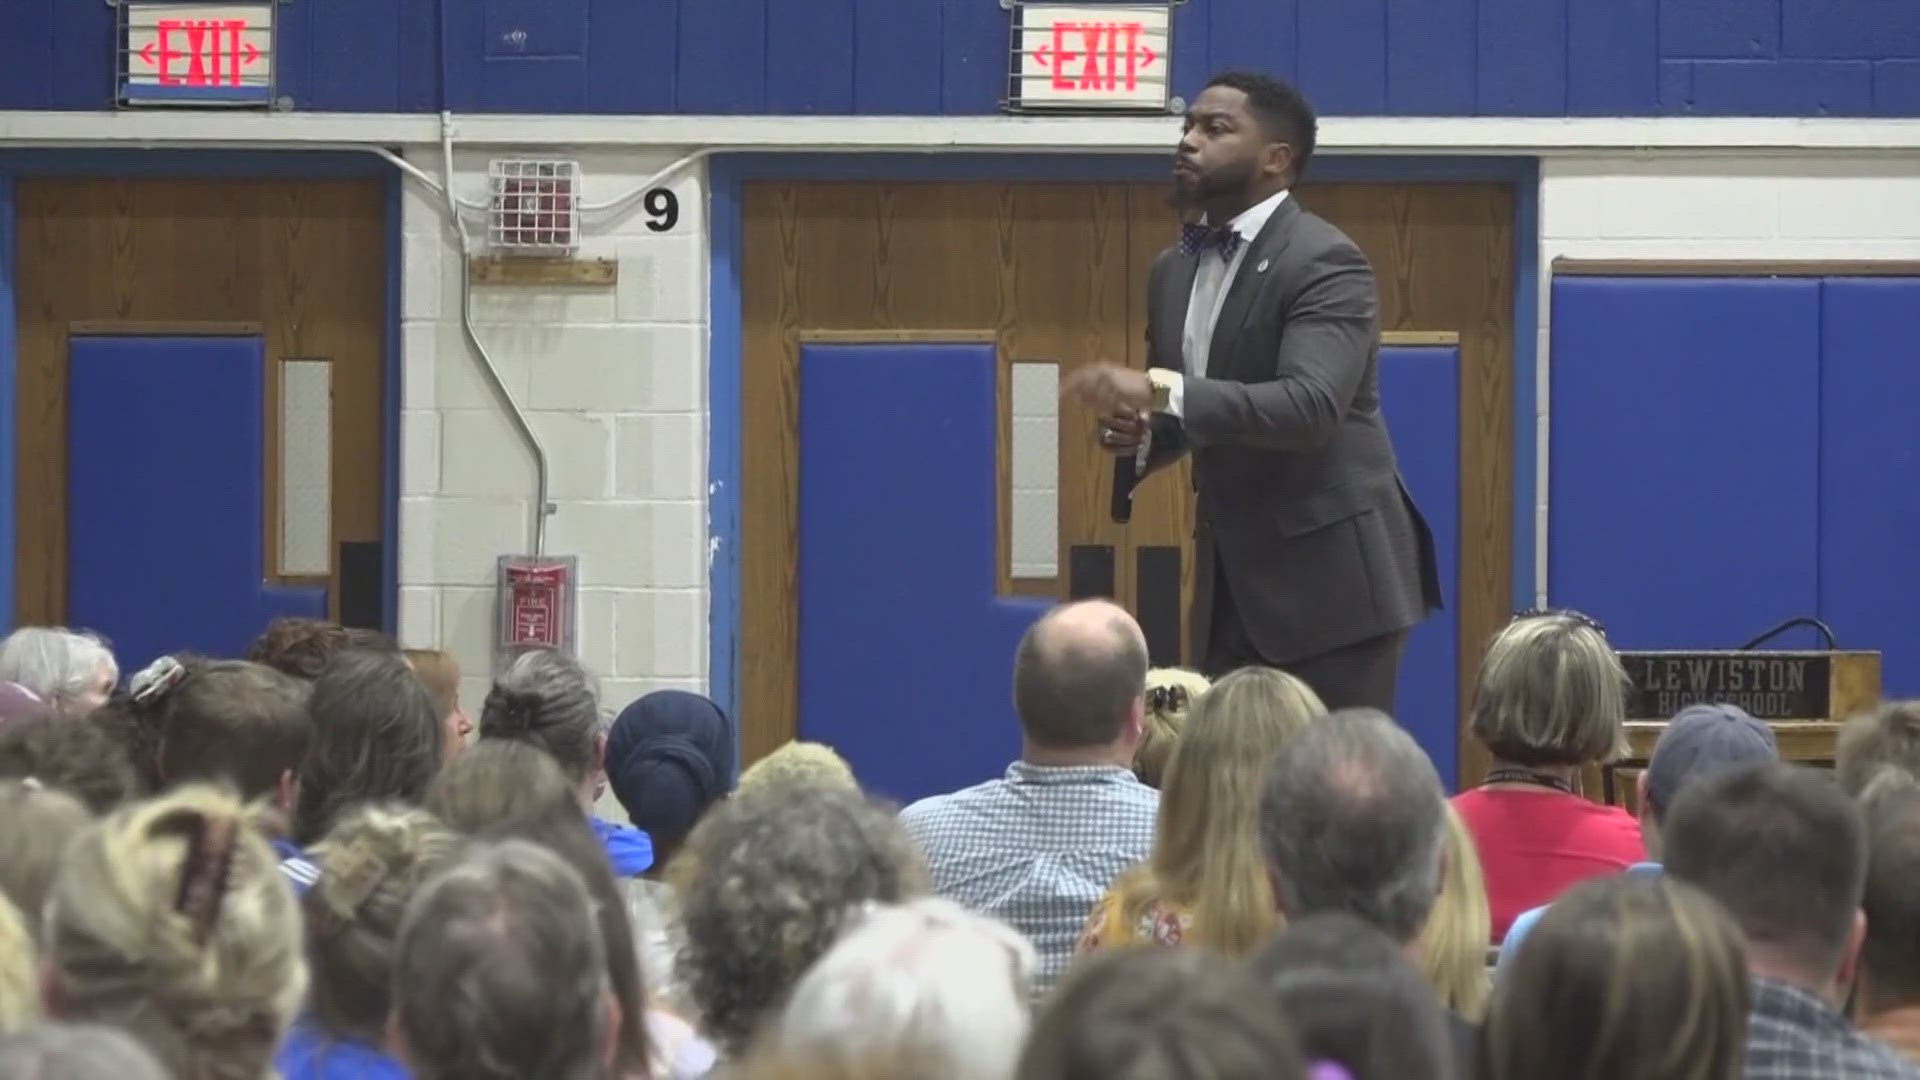 Brandon Fleming gave an inspirational speech at Lewiston High School to ensure teachers are building connections with students first and then focusing on content.